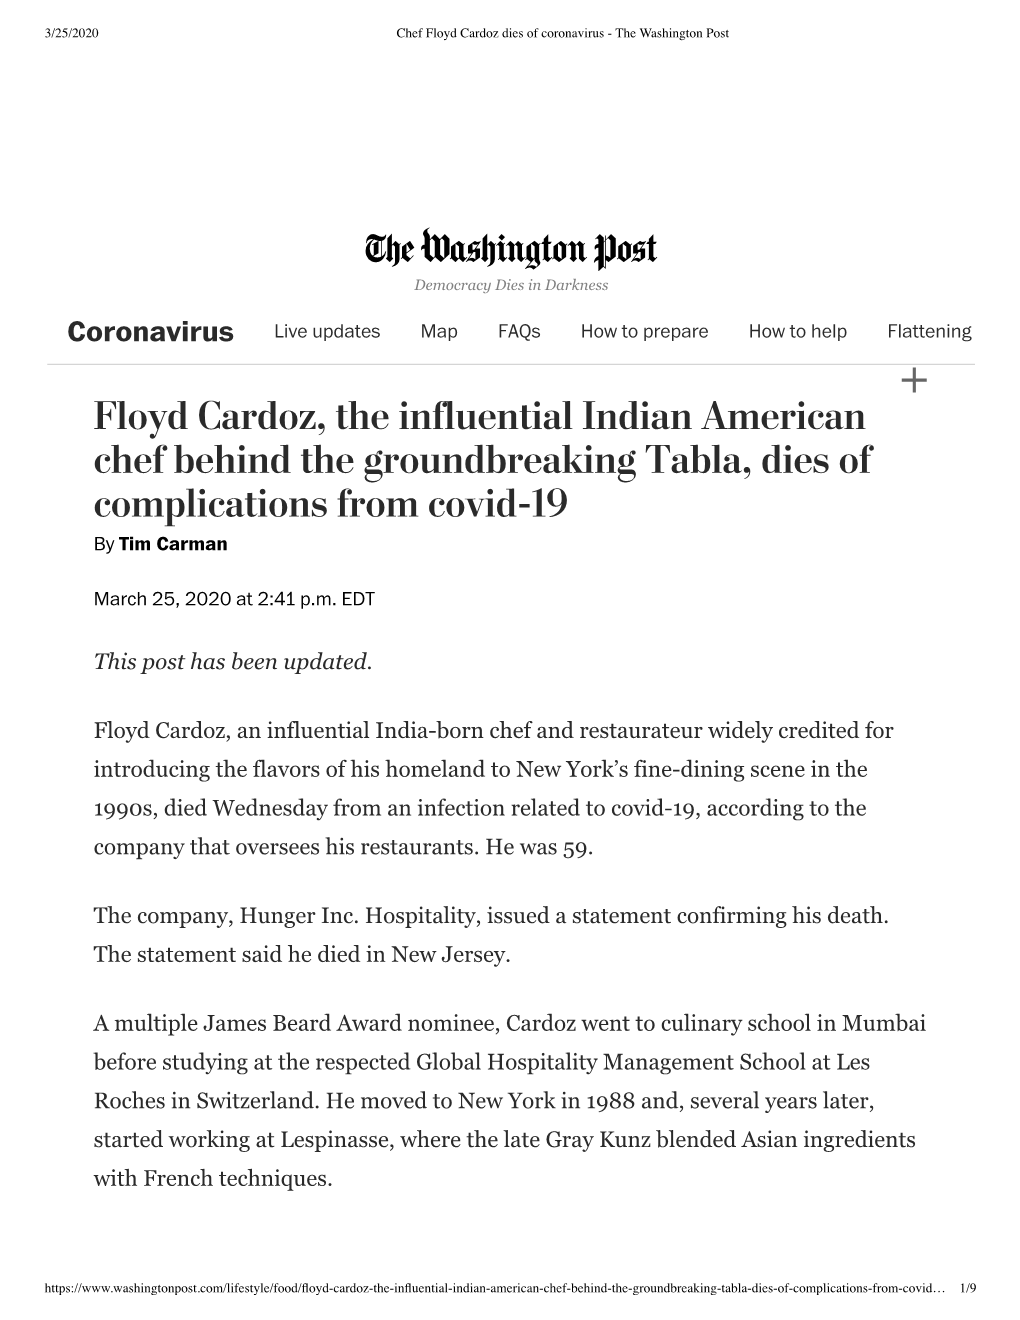 Floyd Cardoz, the Influential Indian American Chef Behind the Groundbreaking Tabla, Dies of Complications from Covid-19 by Tim Carman